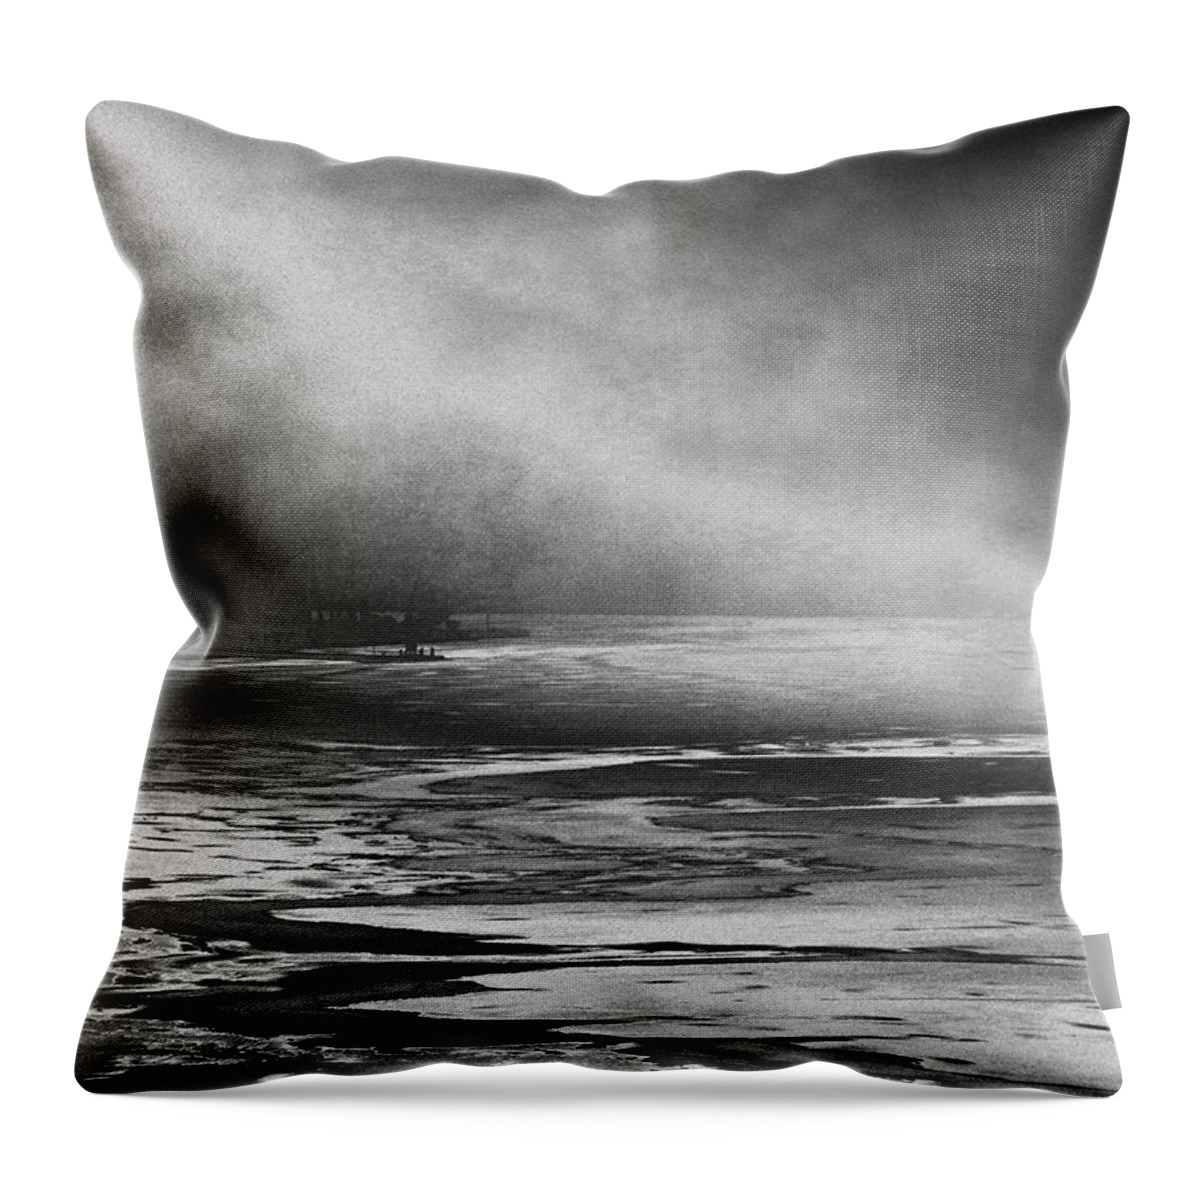 Eerie Throw Pillow featuring the photograph Winter's Song by Steven Huszar